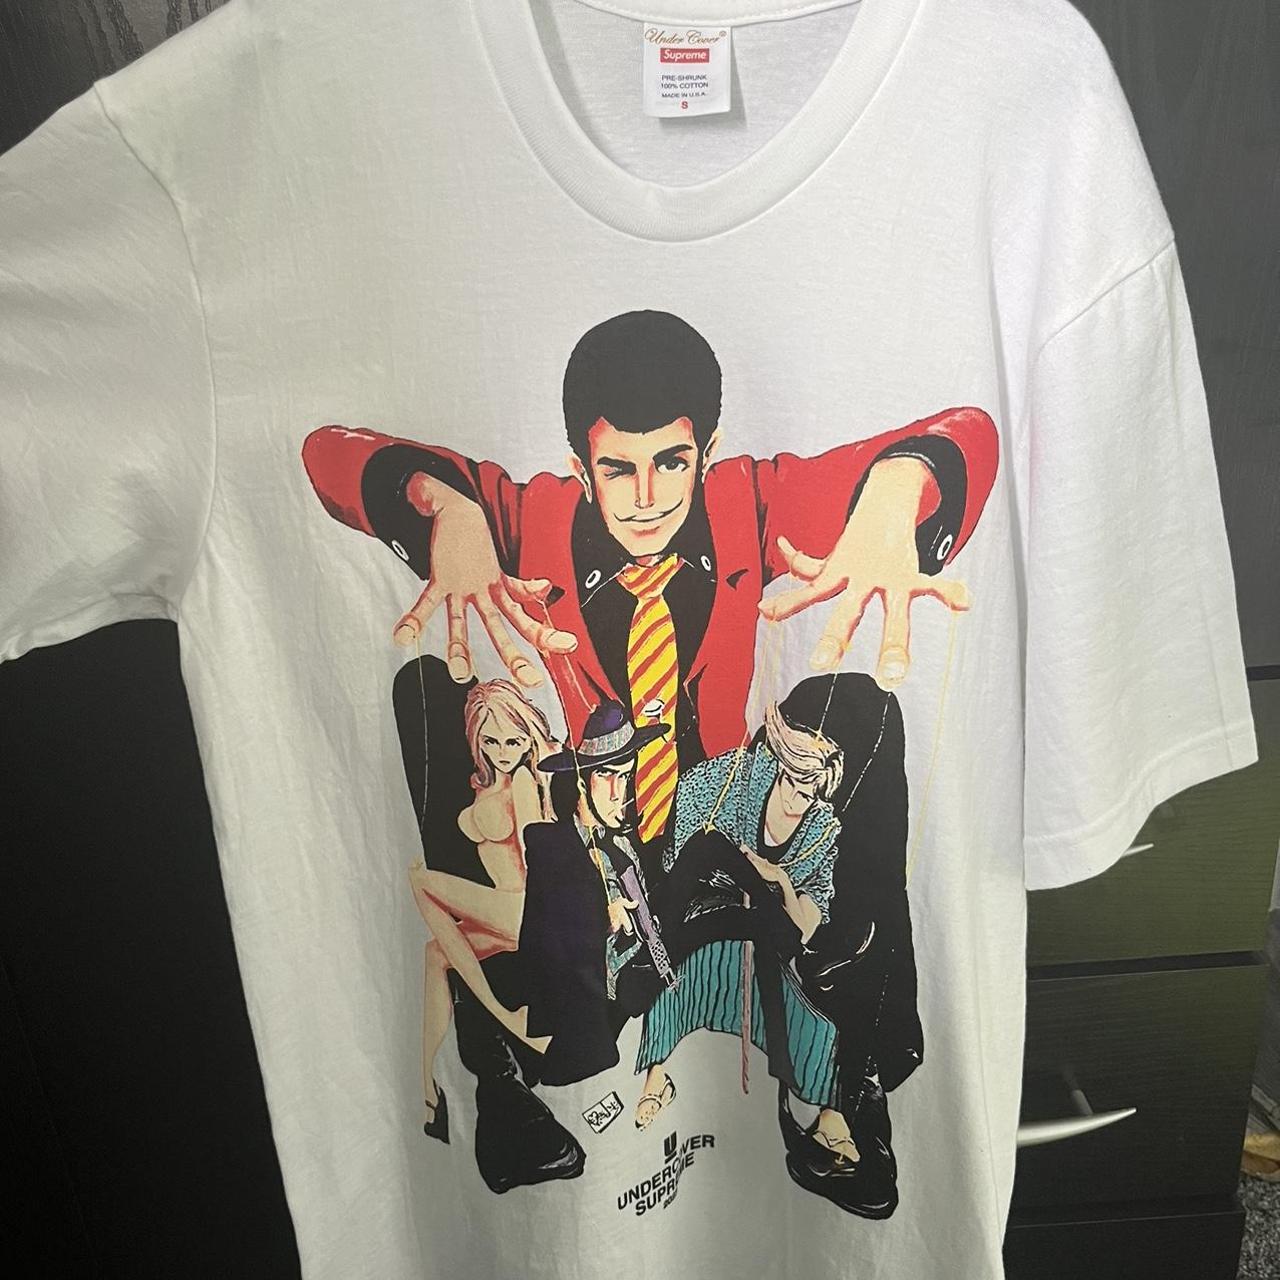 Supreme/Undercover Lupin Tee - size small,... - Depop